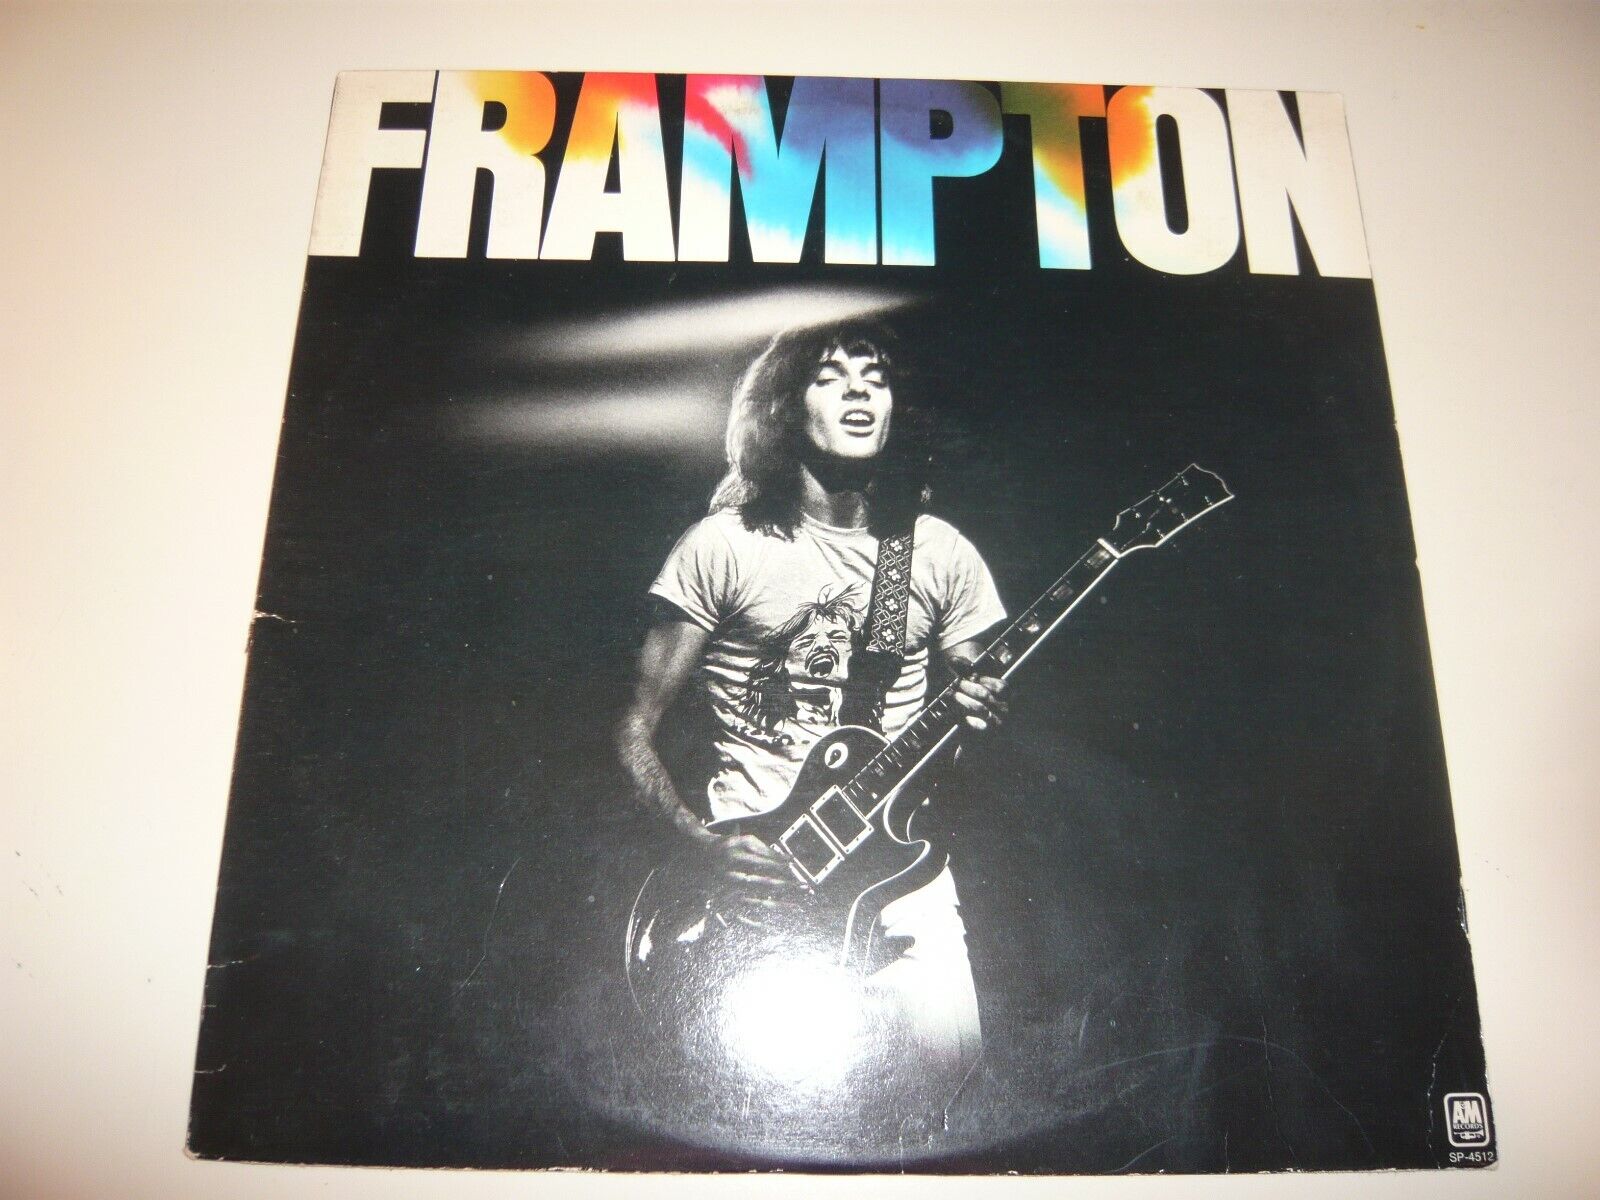 Frampton LP Vinyl Record Album I'll Give W Me Show Money You The Cheap mail order specialty store Oklahoma City Mall